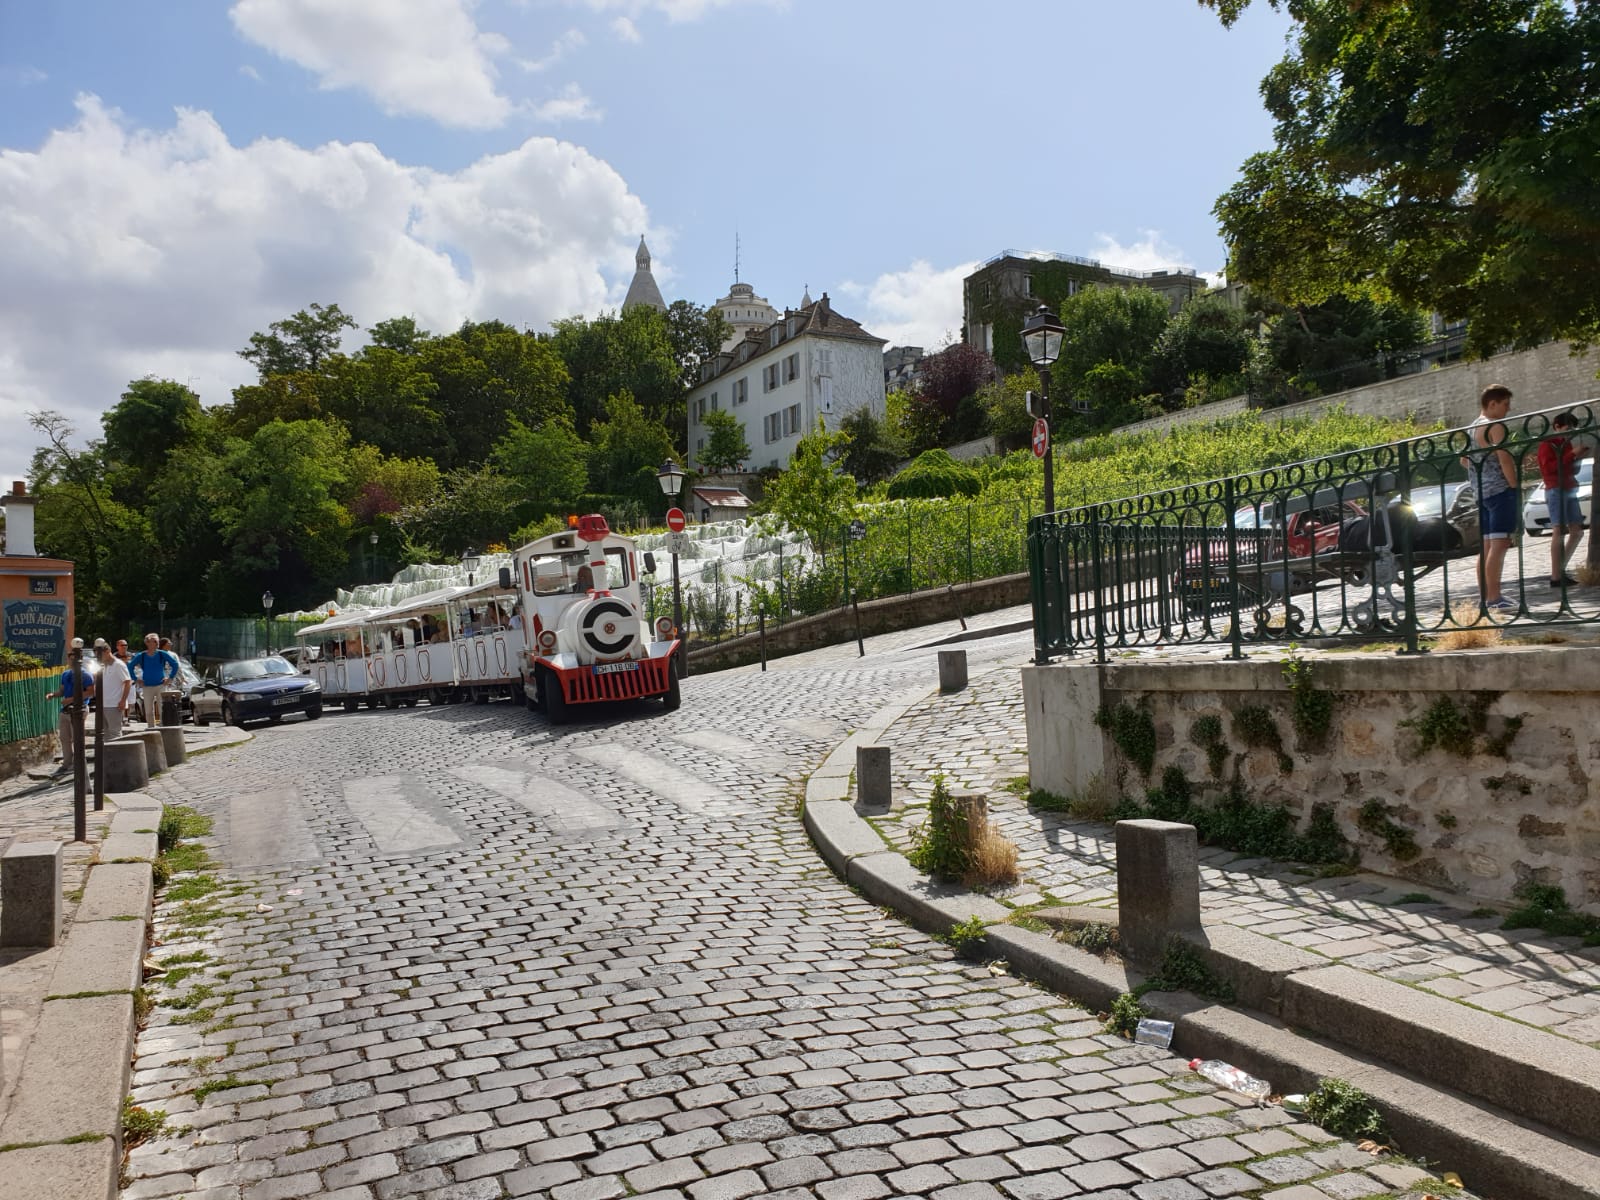 My Montmartre Tours - Vineyards and Little Train of Montmartre